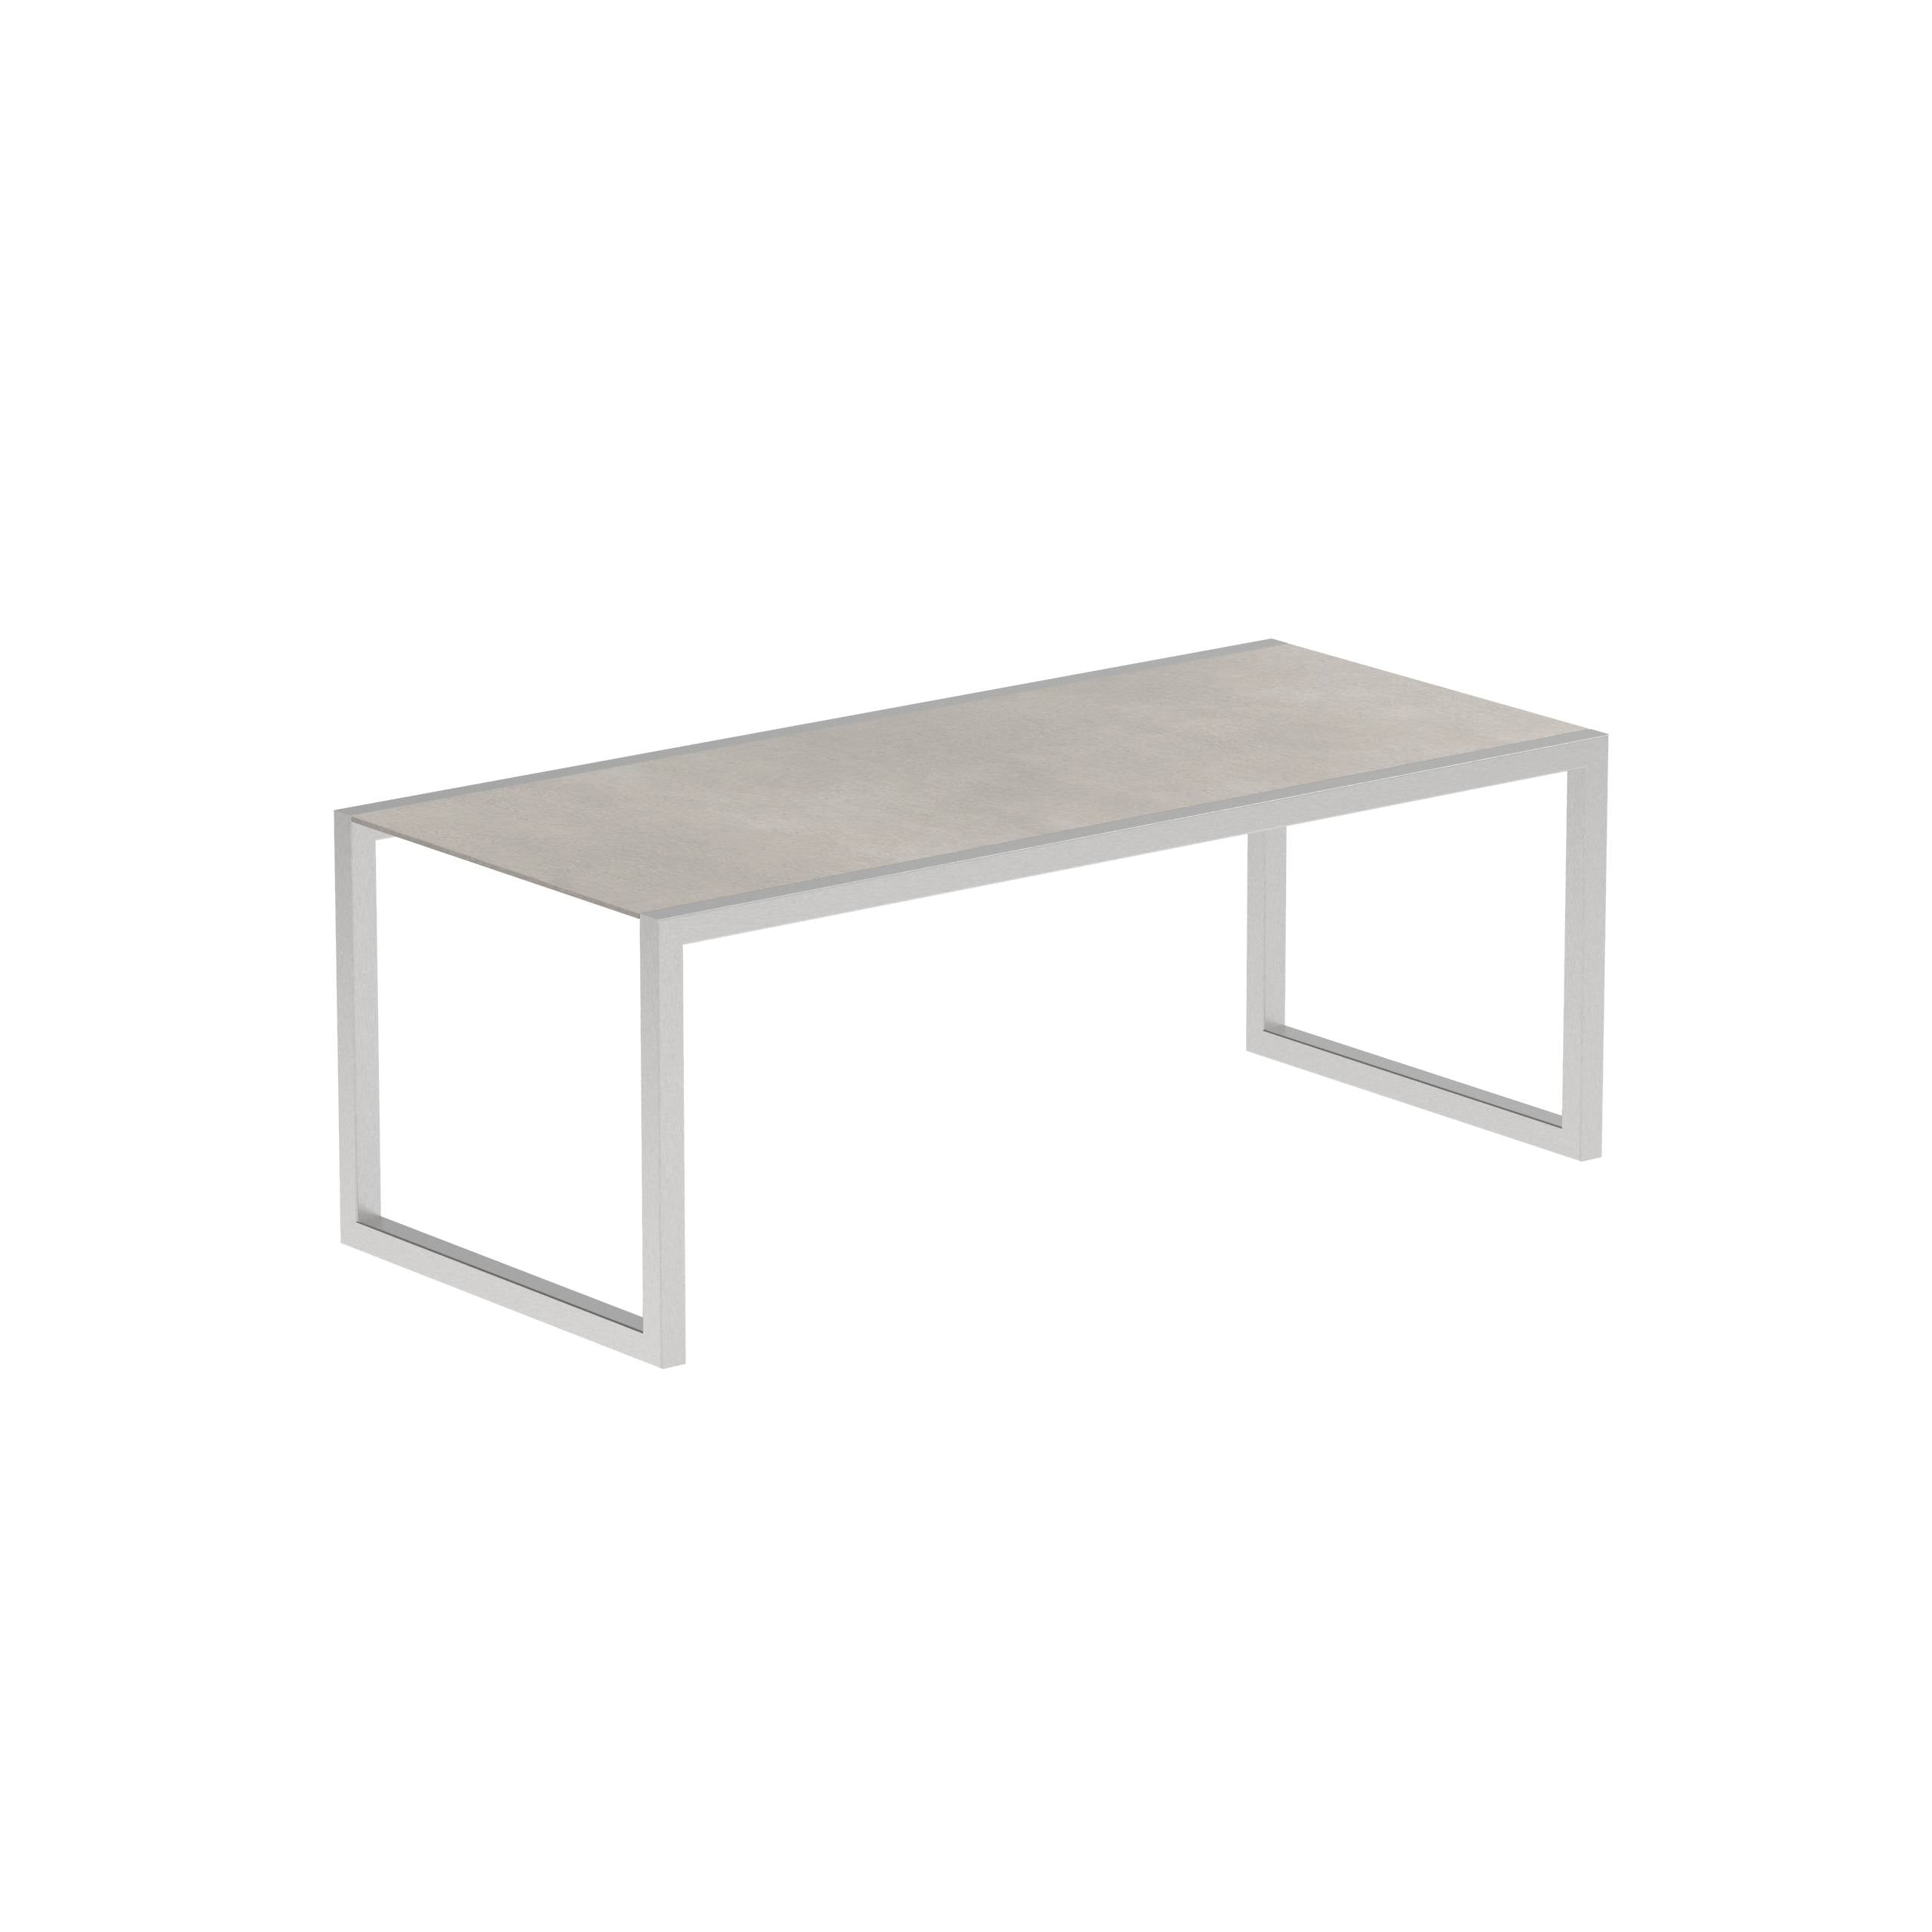 Ninix Table 200x90cm With Stainless Steel And Ceramic Cemento Luminoso